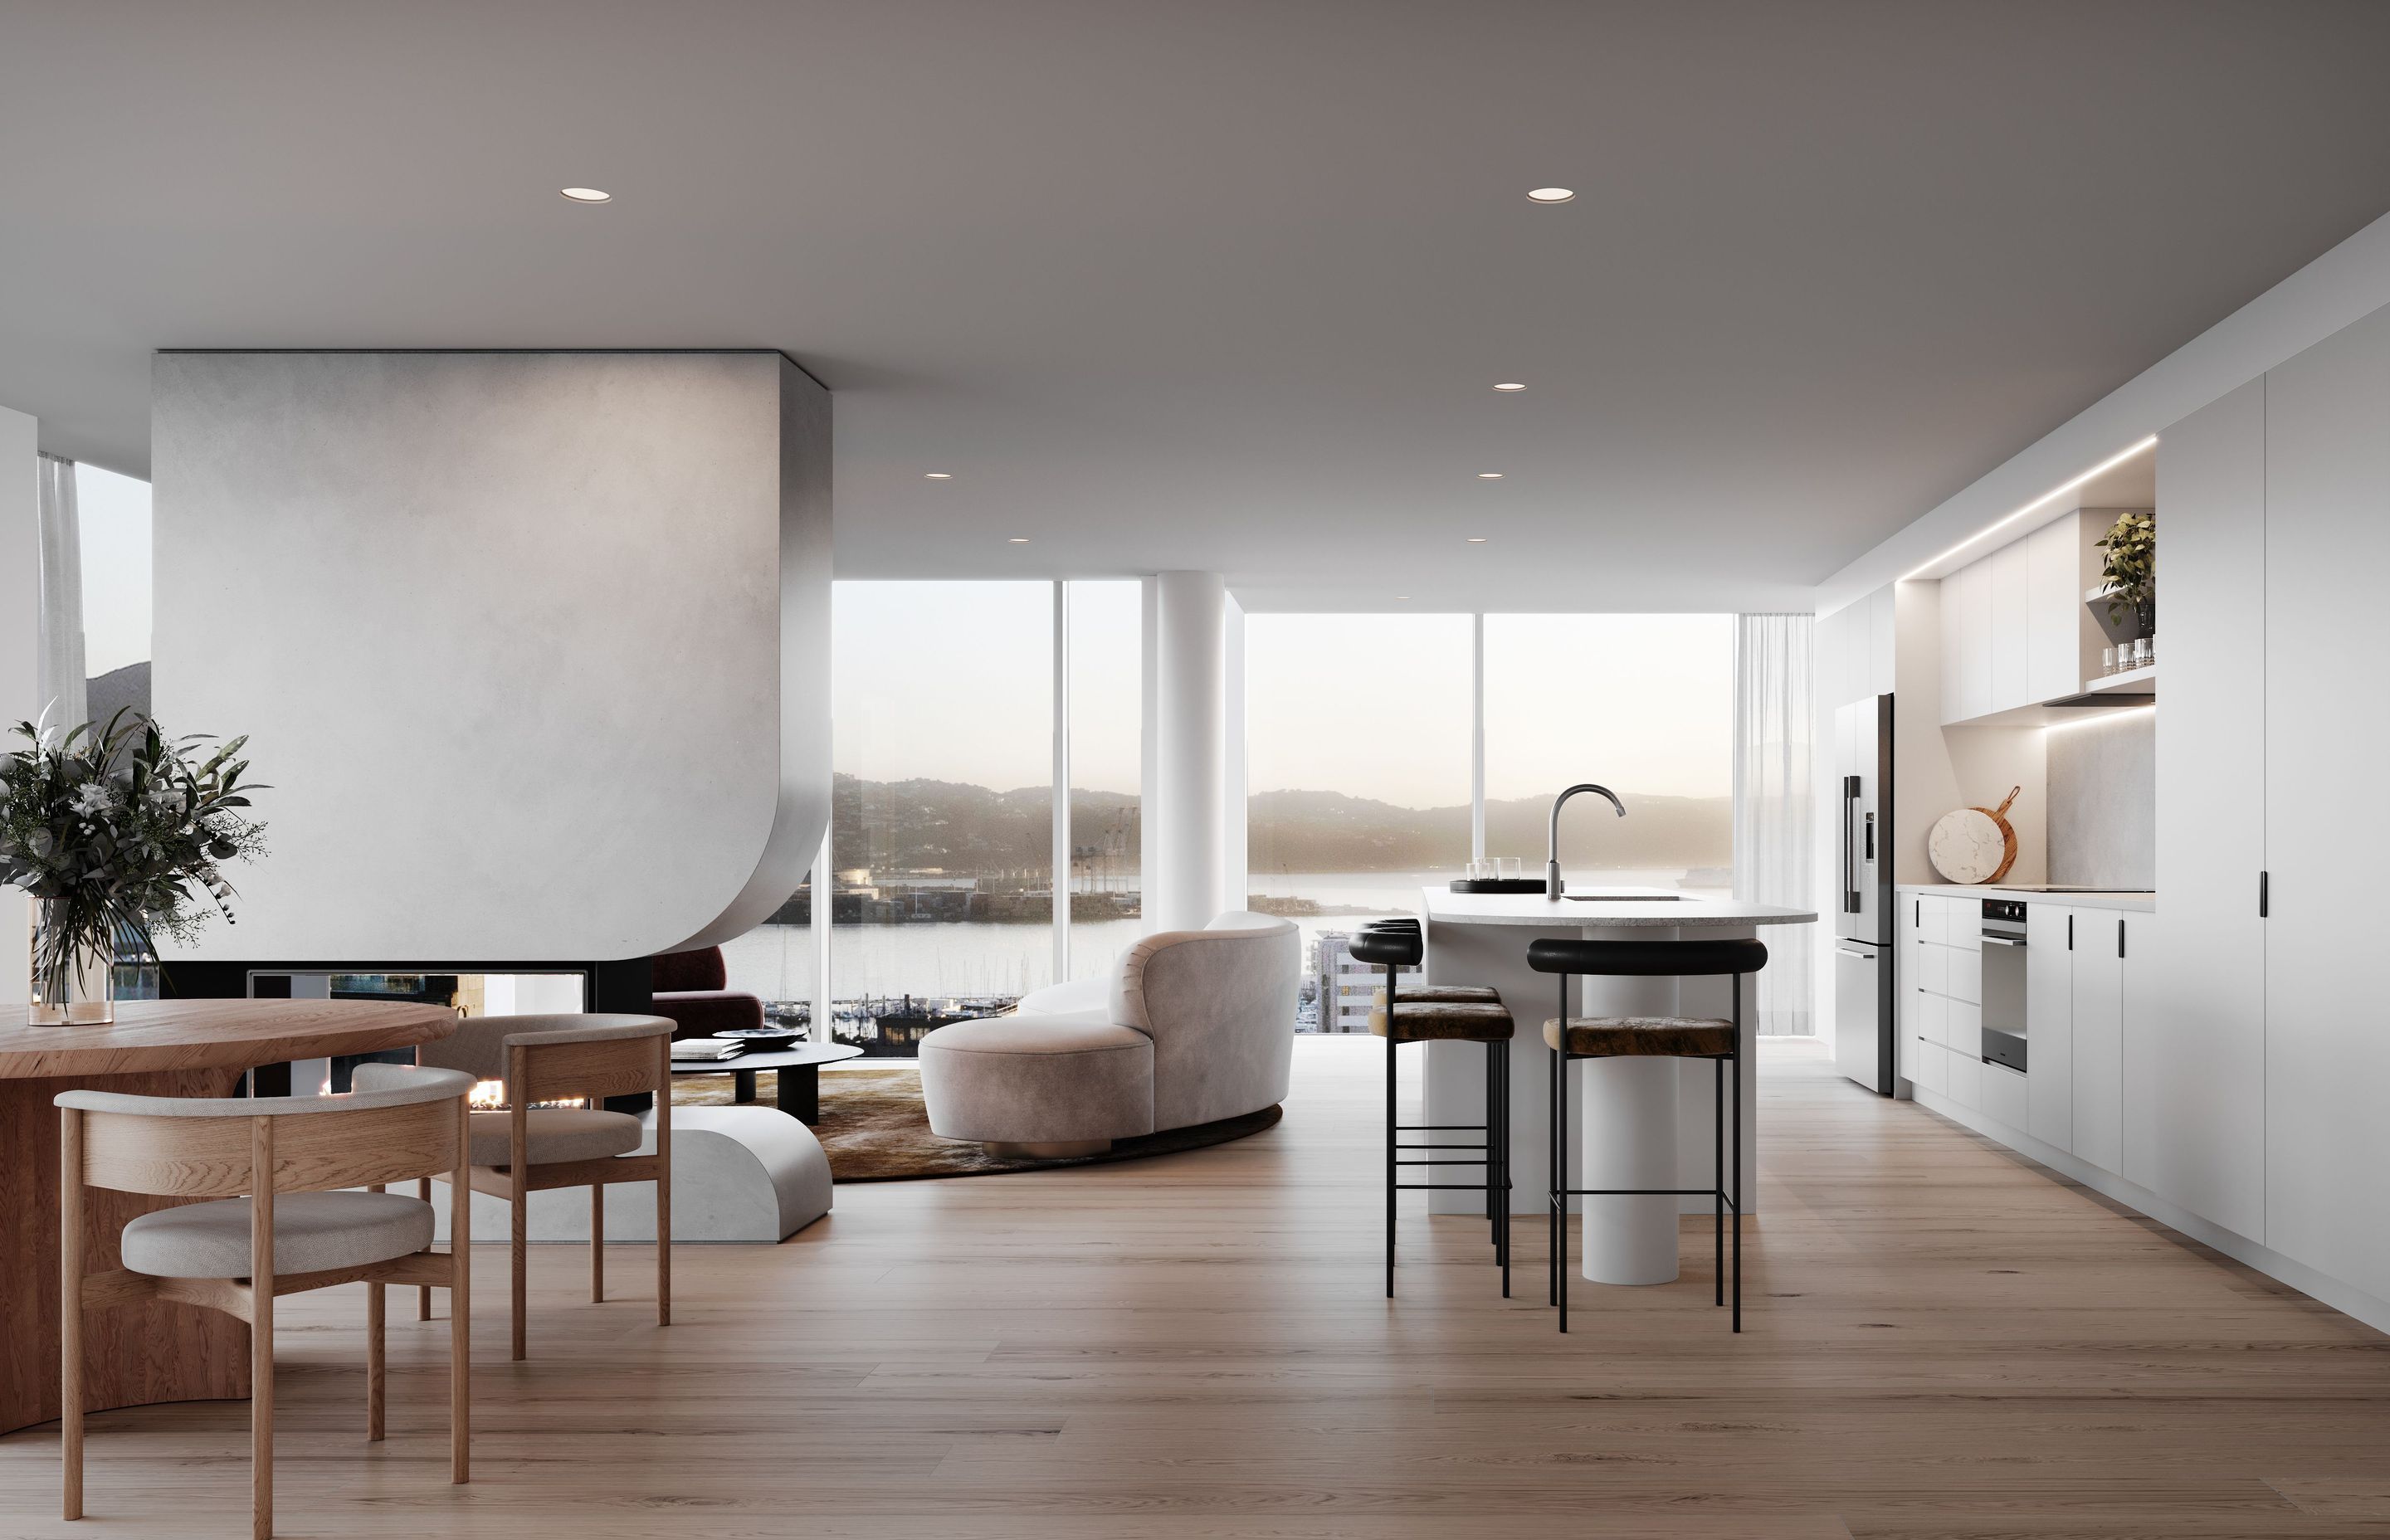 Hyde Lane’s minimalist penthouse interior, strategically designed to enhance the high-rise views.